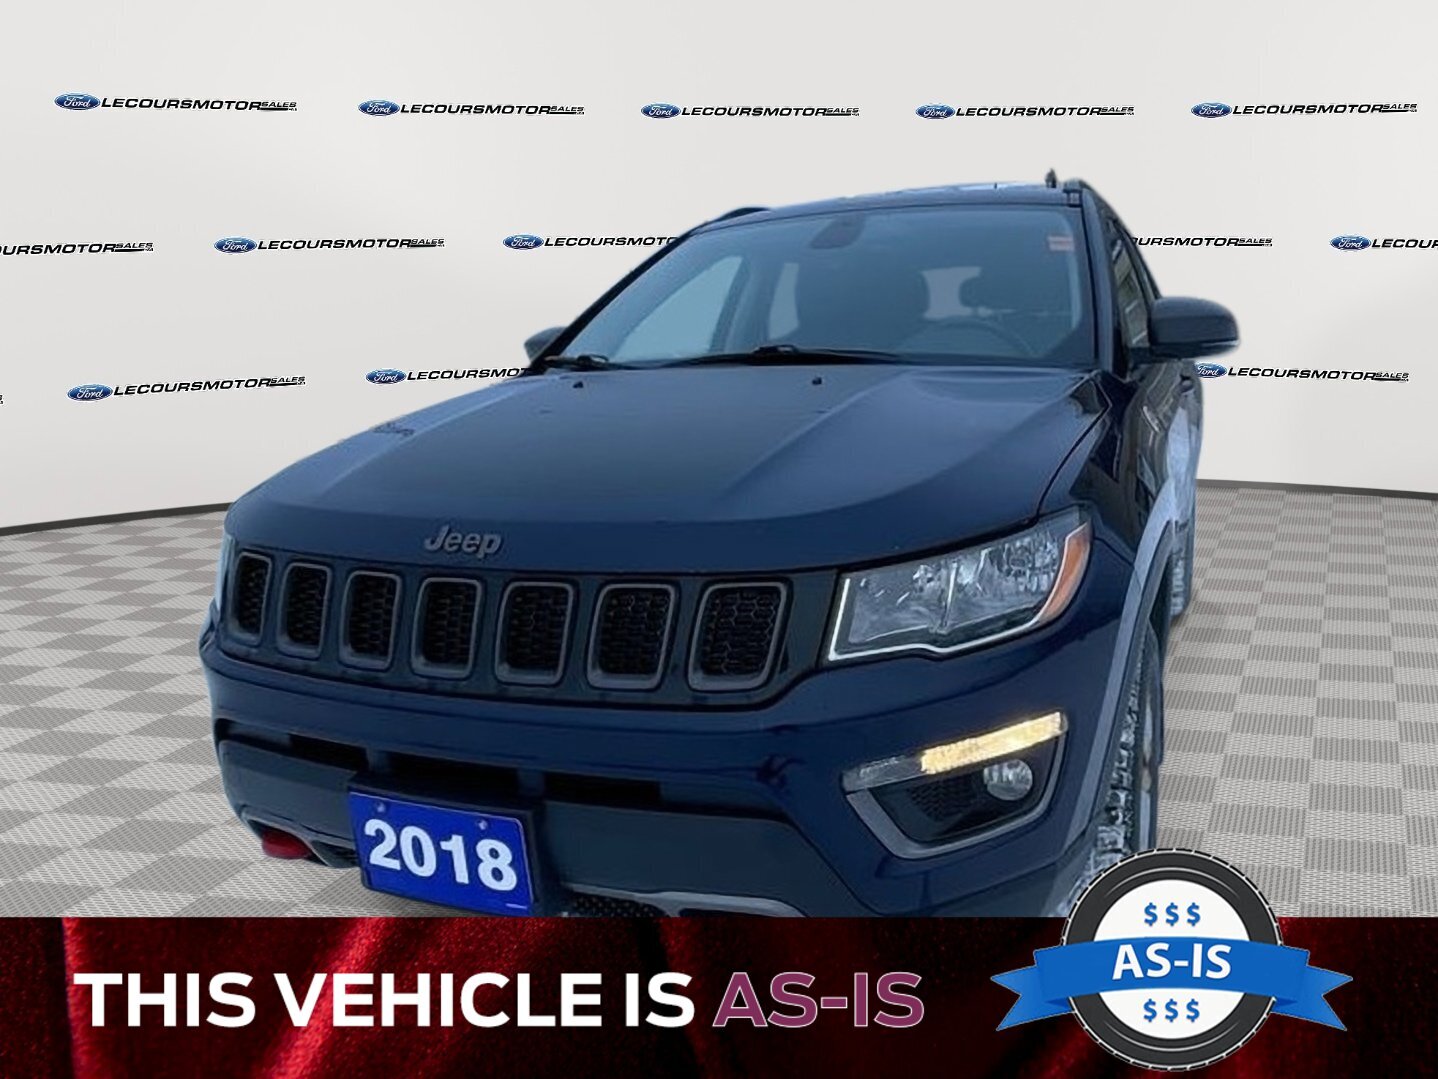 2018 Jeep Compass AS IS | CONTACT US FOR MORE INFO |